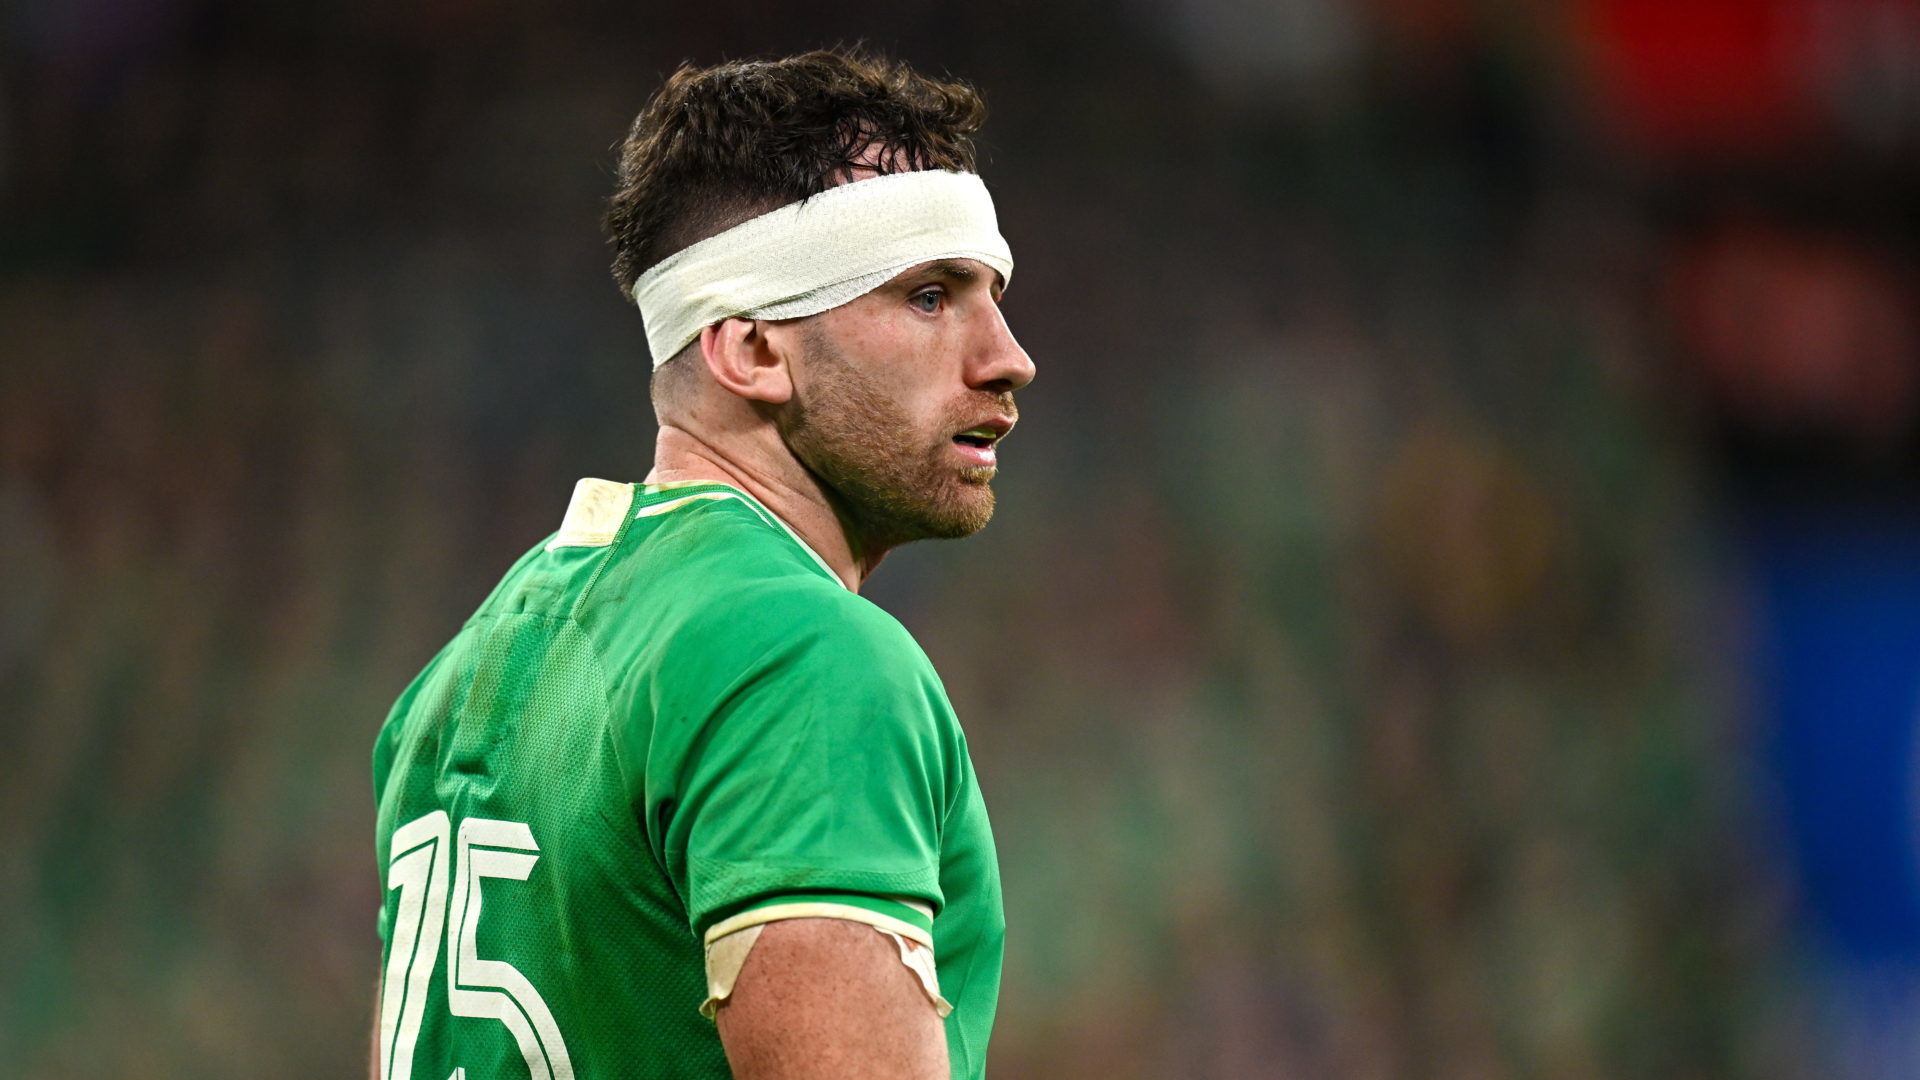 Ireland needs someone to challenge Hugo Keenan at fullback, in order to start building depth there, according to Keith Wood and Fiona Hayes.